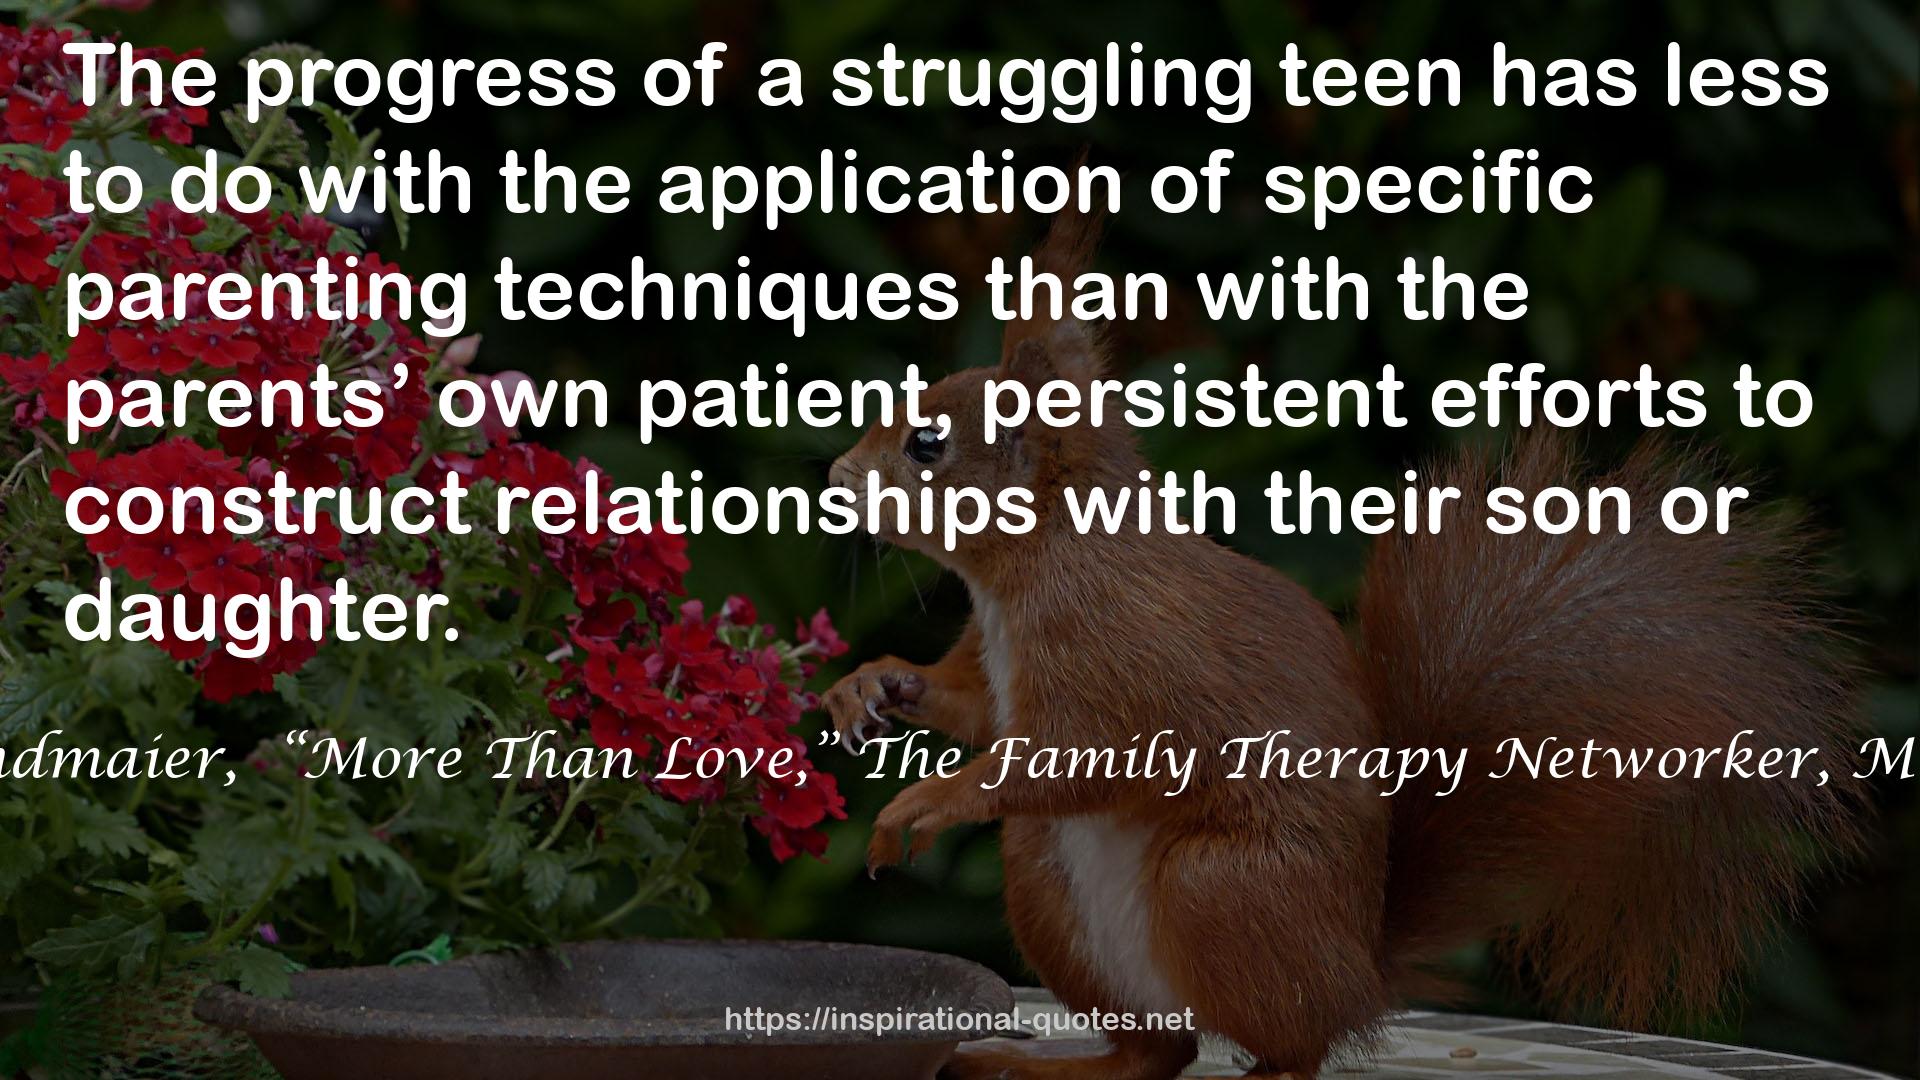 Marian Sandmaier,  “More Than Love,” The Family Therapy Networker, May/June 1996 QUOTES